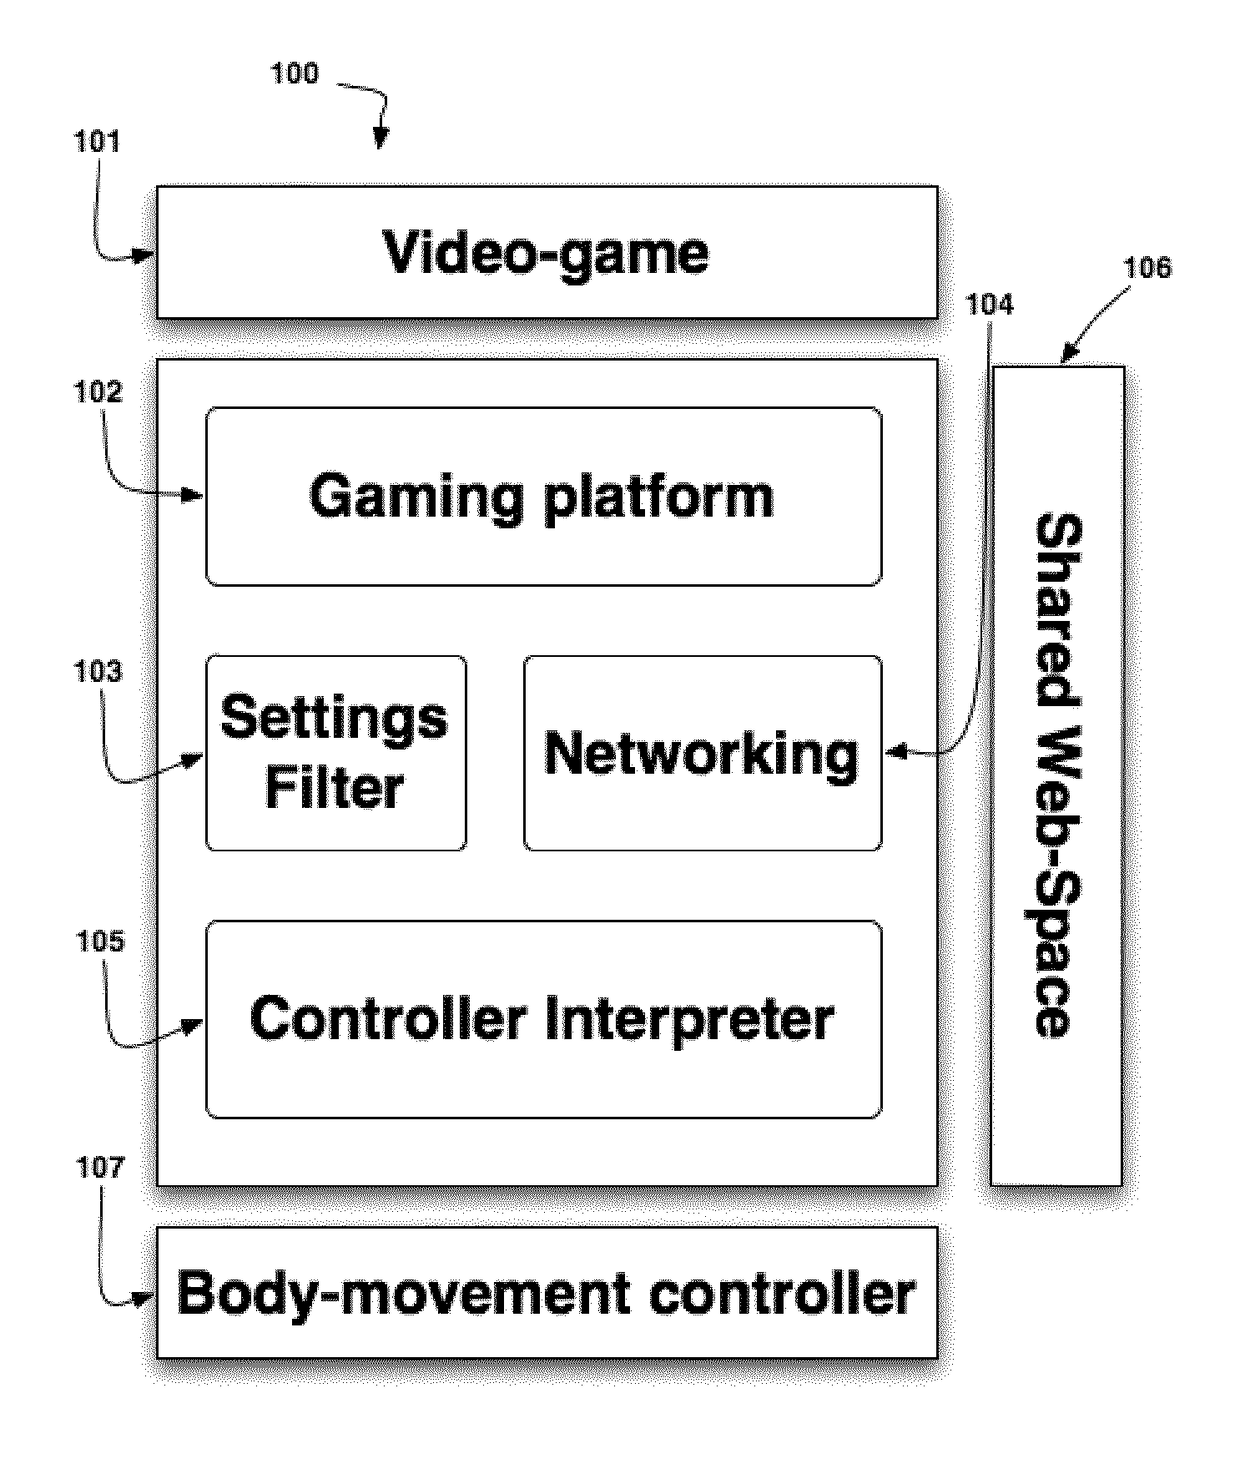 System and methods to remotely and asynchronously interact with rehabilitation video-games